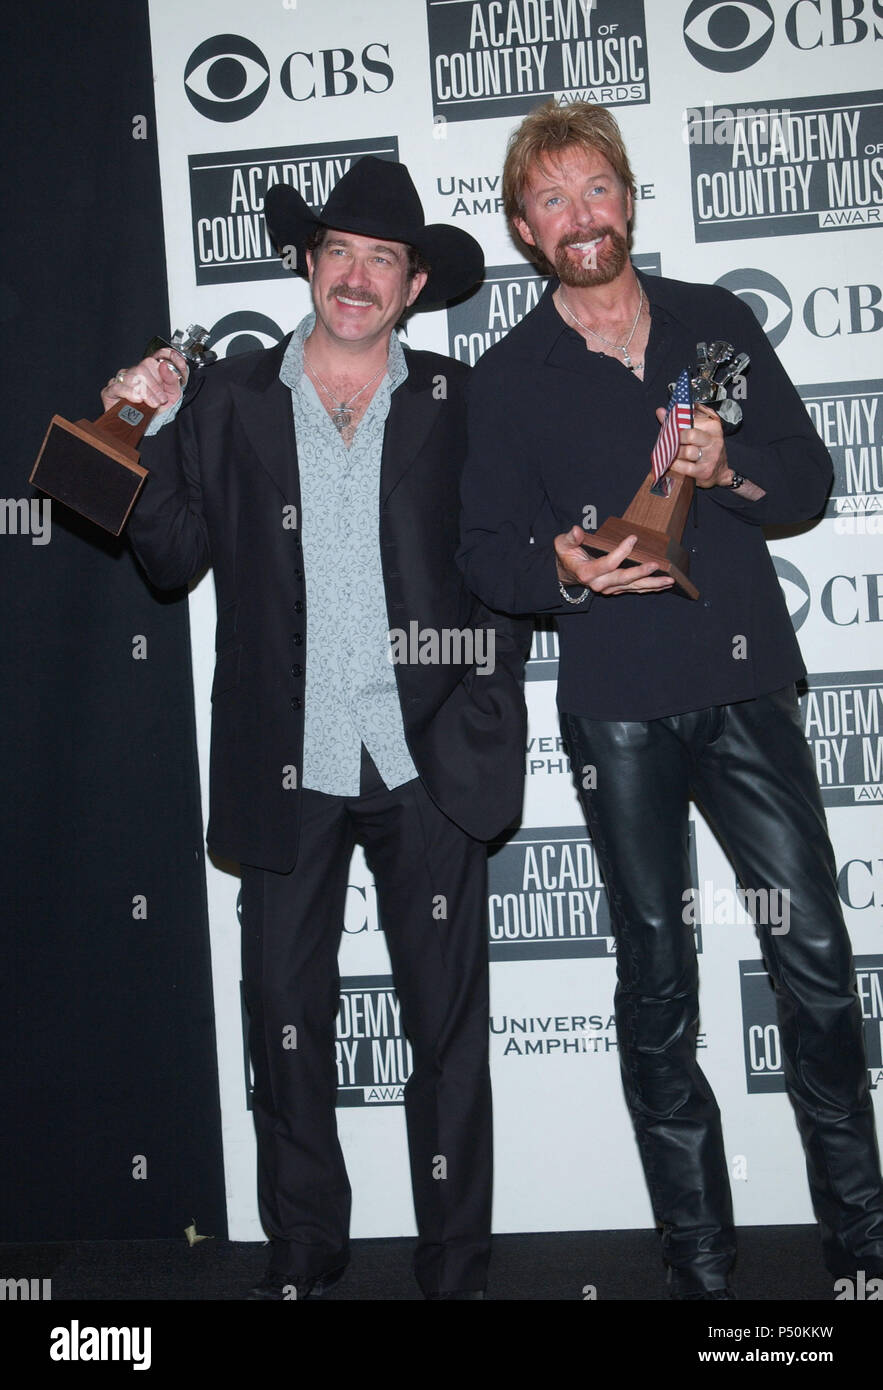 Entertainer of the Year winners Brooks & Dunn at The 37th Annual Academy of Country Music Awards held at the Universal Ampitheatre in Los Angeles, Ca., May 22, 2002.            -            Brooke&Dunn 04.jpgBrooke&Dunn 04  Event in Hollywood Life - California, Red Carpet Event, USA, Film Industry, Celebrities, Photography, Bestof, Arts Culture and Entertainment, Topix Celebrities fashion, Best of, Hollywood Life, Event in Hollywood Life - California,  backstage trophy, Awards show, movie celebrities, TV celebrities, Music celebrities, Topix, Bestof, Arts Culture and Entertainment, Photography Stock Photo